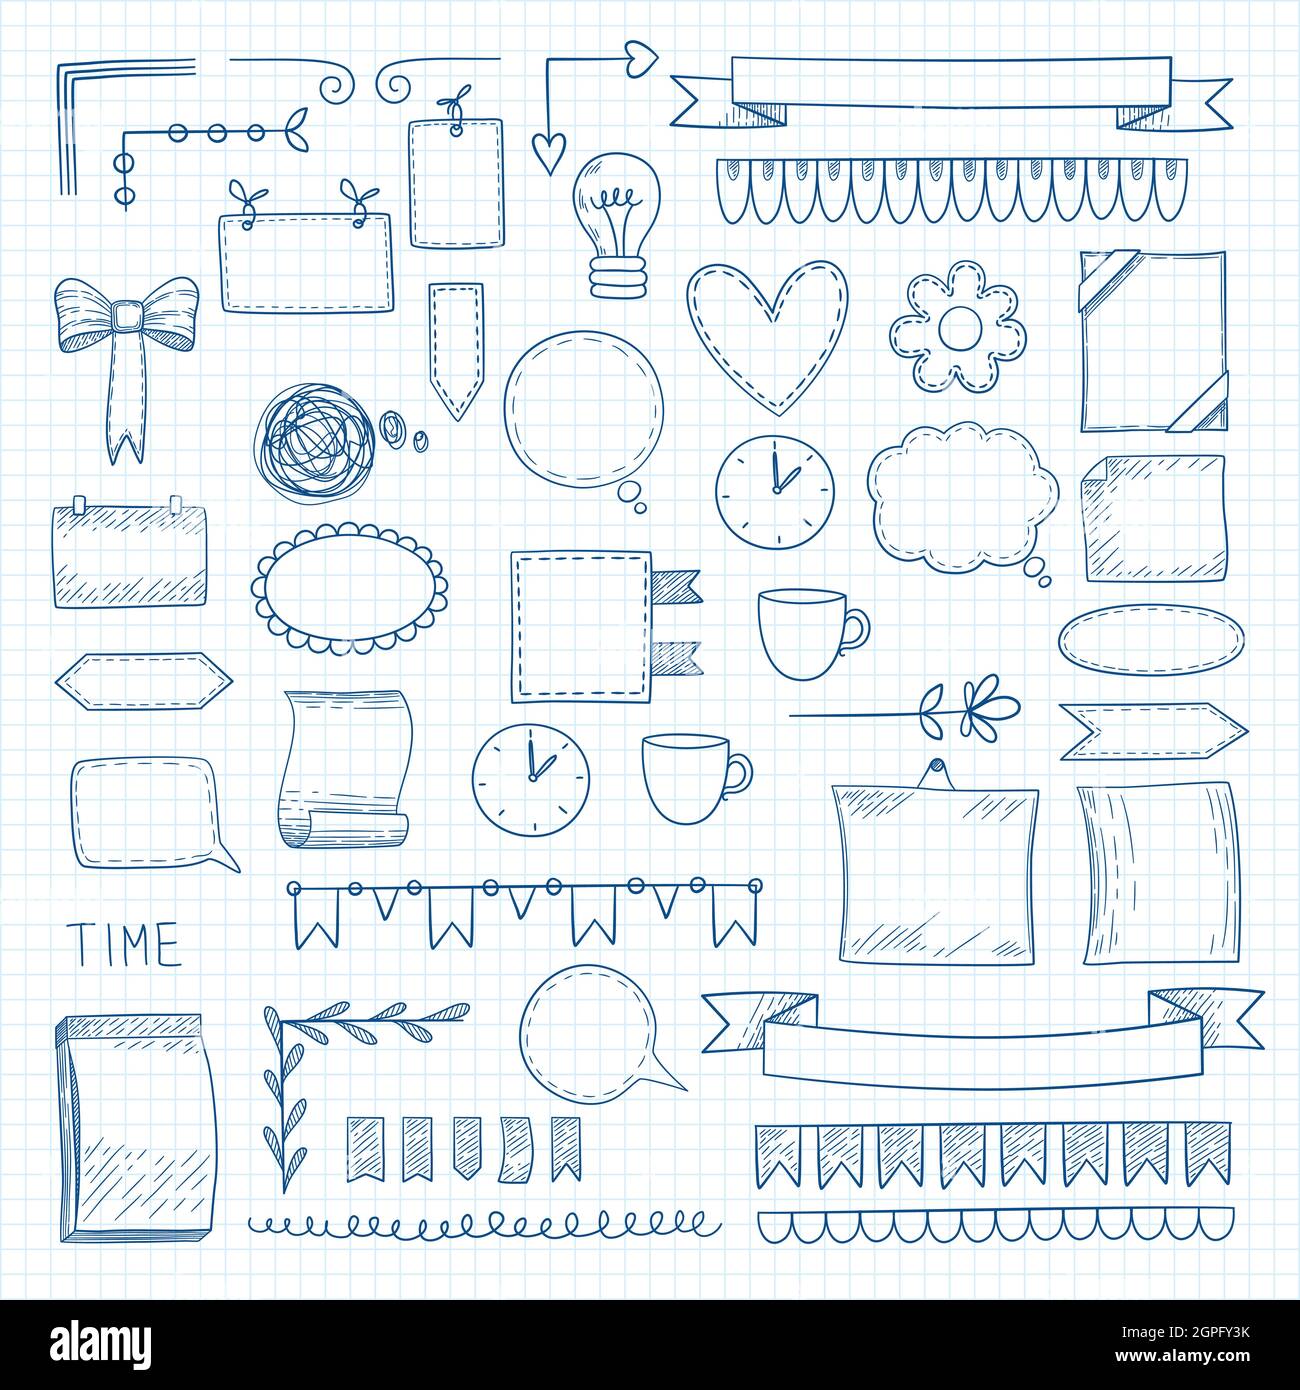 Diary doodle notes. Hand drawn graphic shapes frames for notebook daily bullet journal ideas vector labels Stock Vector